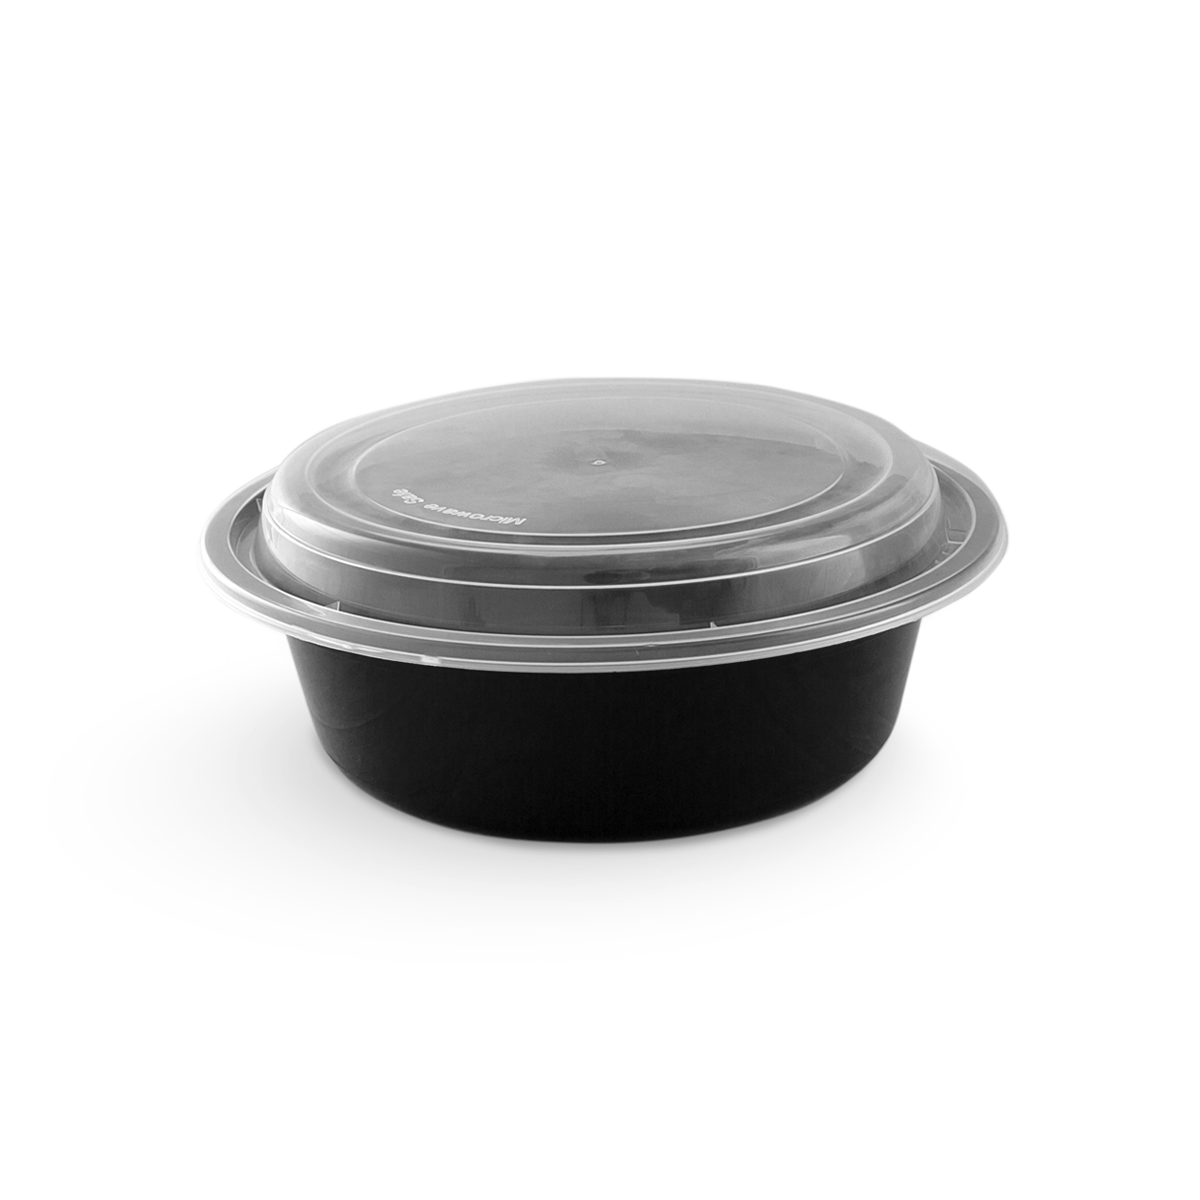 Tripak 24 oz 7" Round Reusable Black Container Lid for Microwave Pack 150 